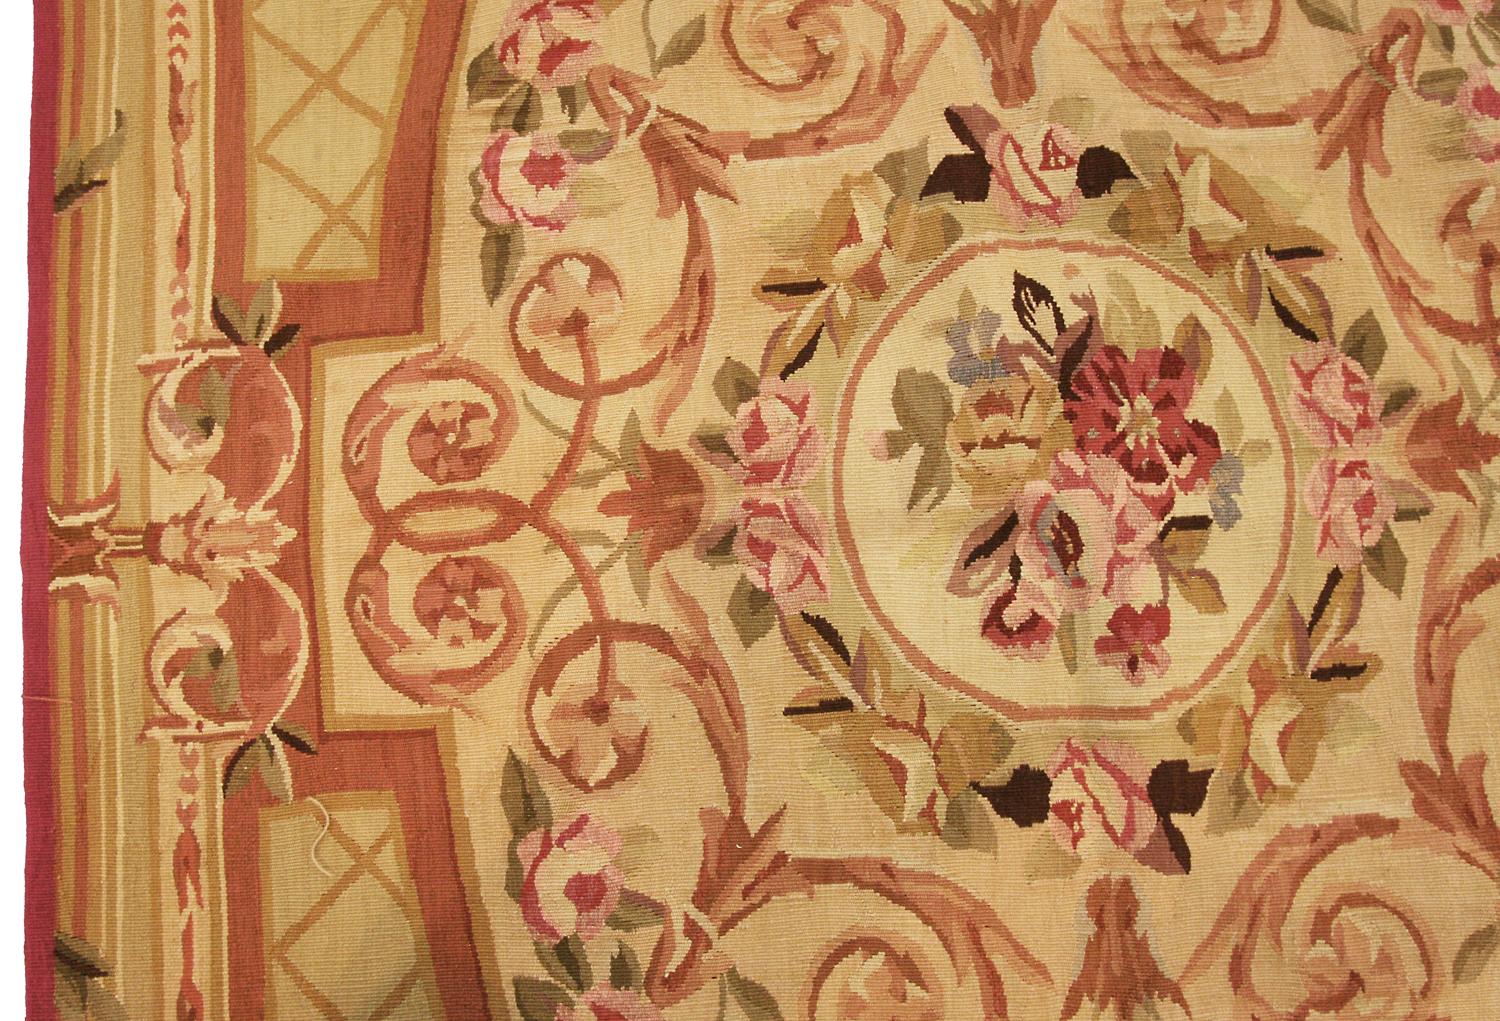 Hand-Knotted Aubusson French Style Rug Floral Design with Medallion Field, 21st Century